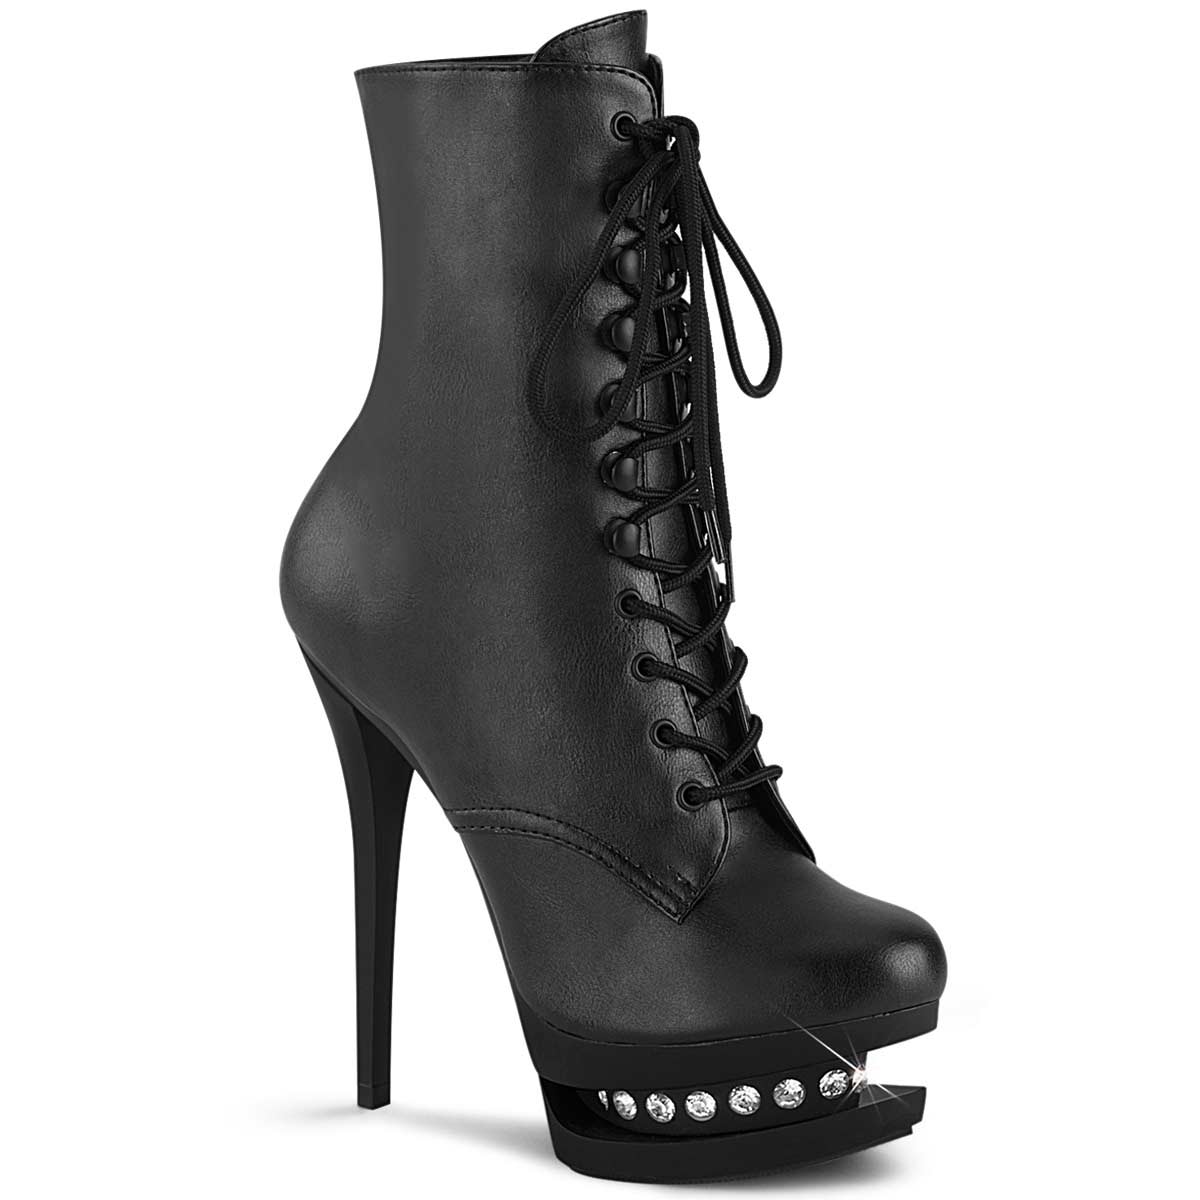 Pleaser Blondie-R-1020 - Black Faux Leather Matte in Sexy Boots - $58.95